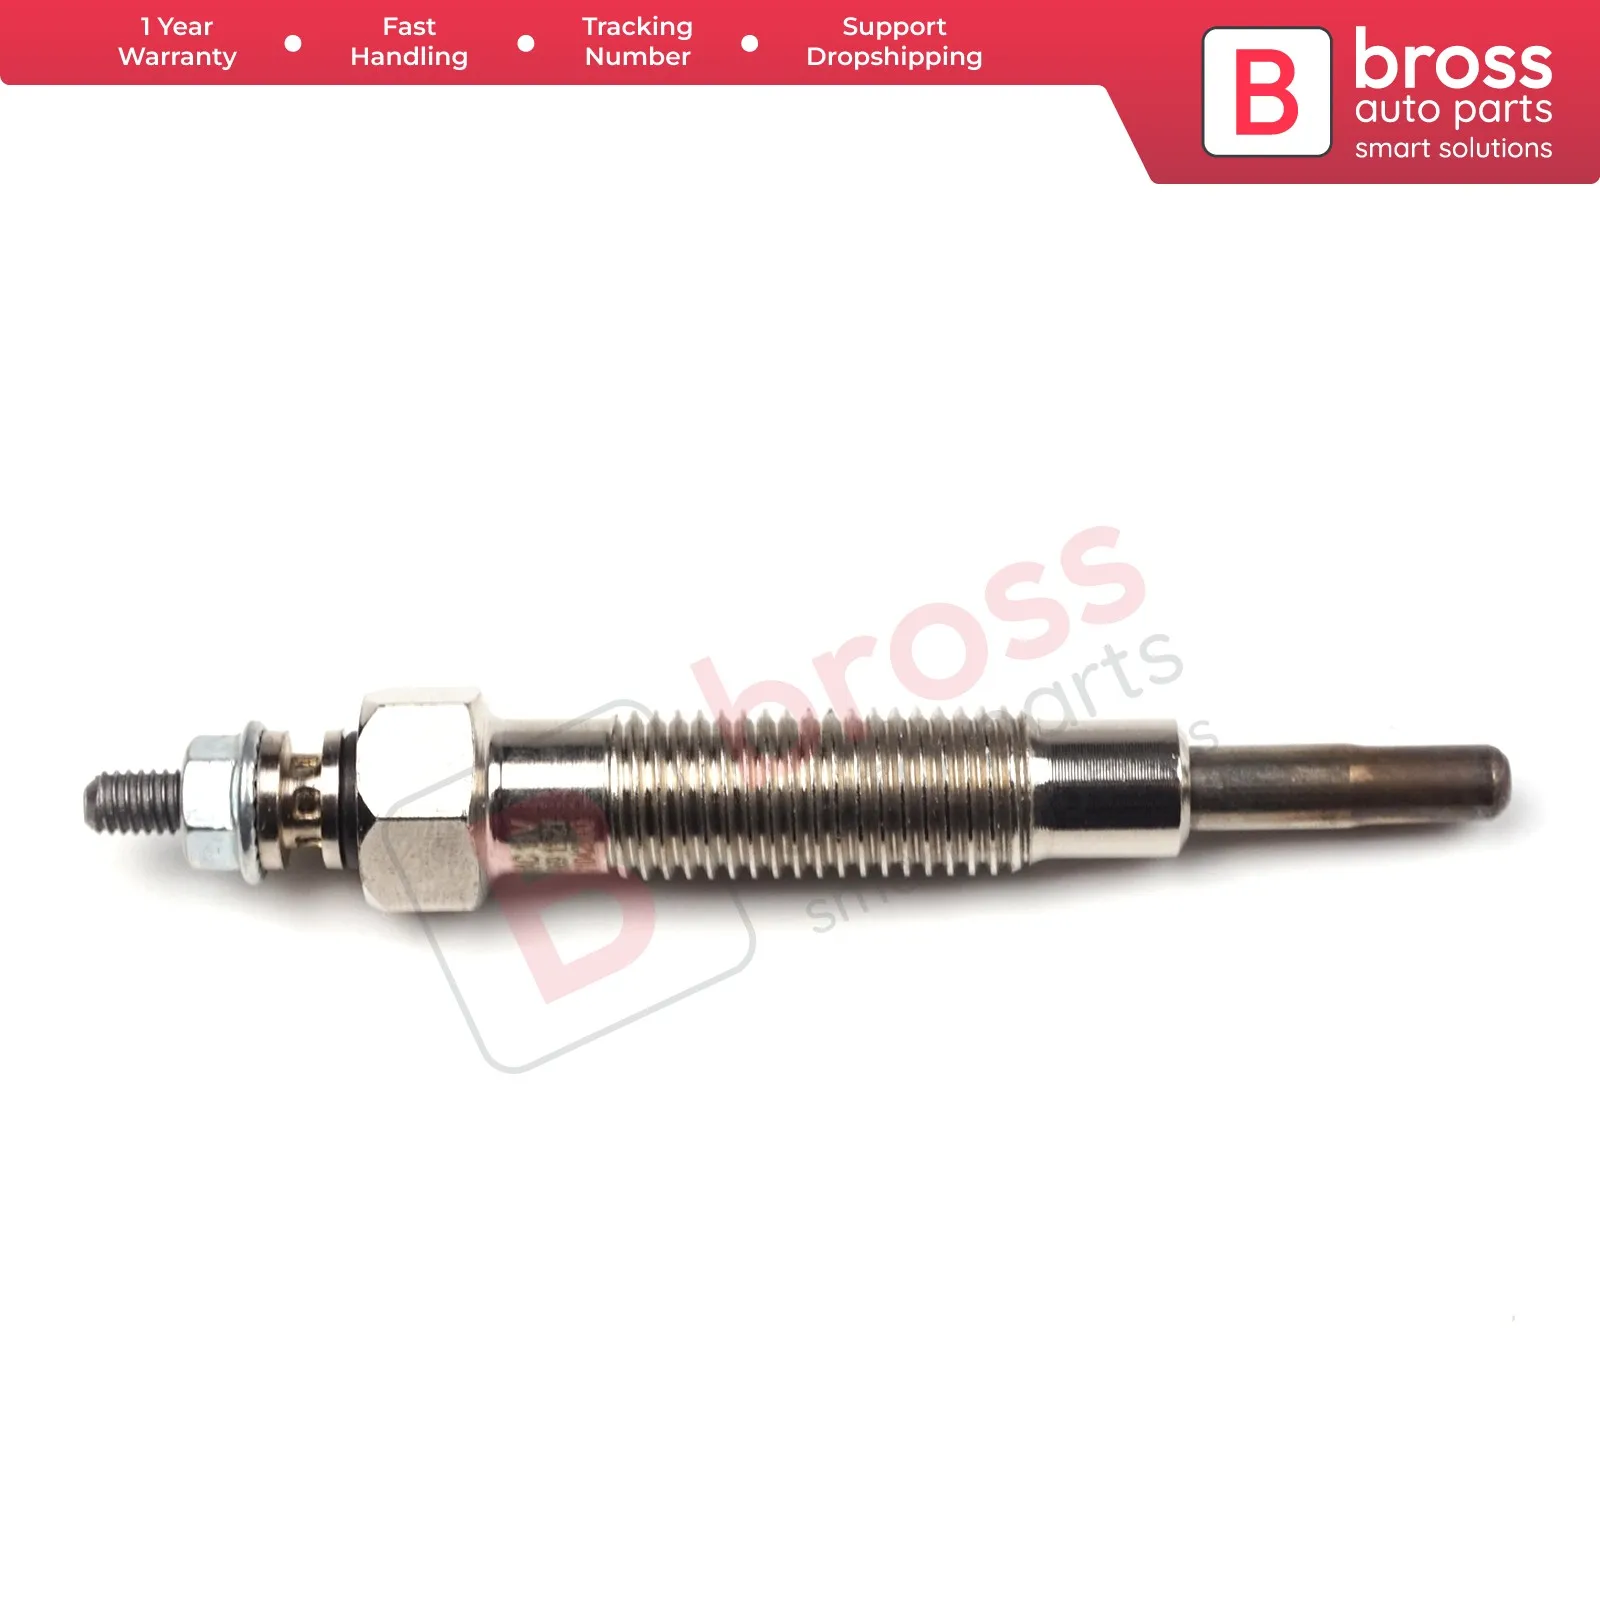 

Bross BGP80 1 Piece Heater Glow Plug 11 Volt MD197511, GN107, 0100226511, 0 250 202 093, CY57 for Mitsubishi Hyundai Top Store